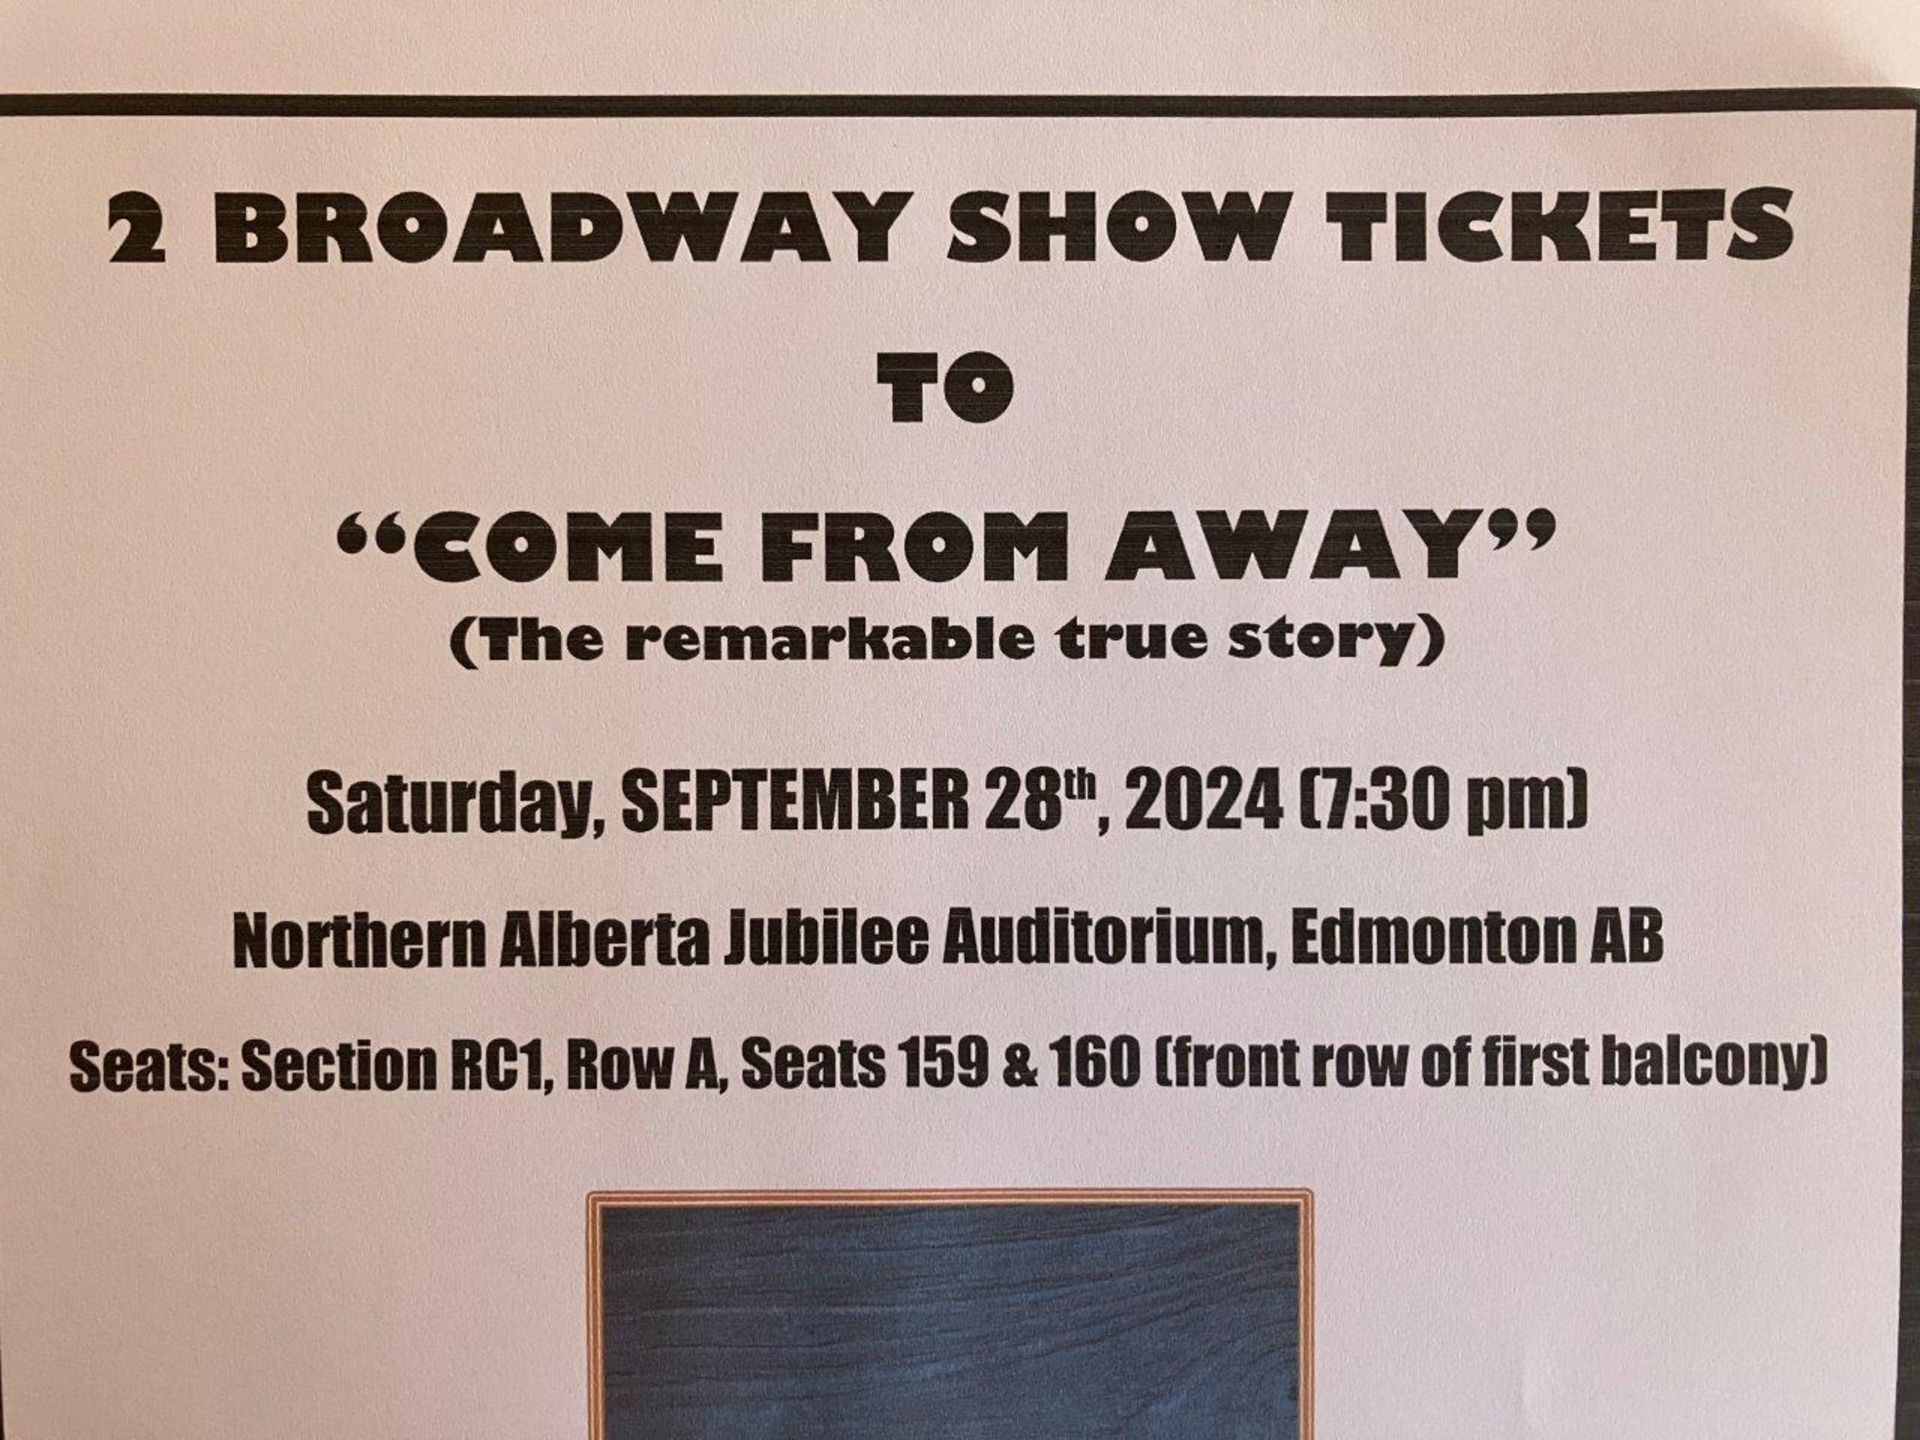 2 BROADWAY SHOW TICKETS TO "COME FROM AWAY" - Image 3 of 3